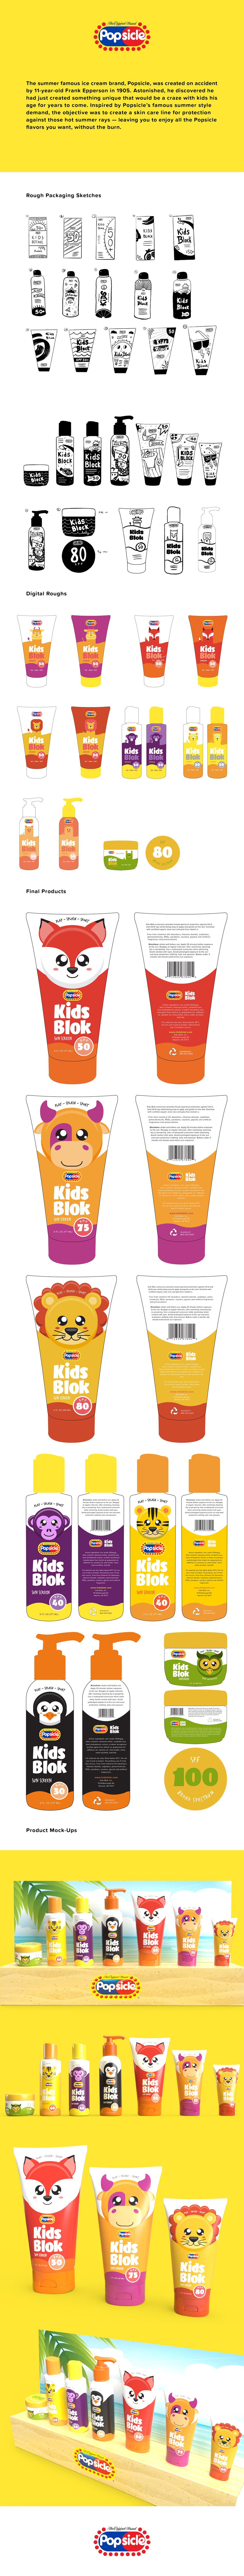 popsicle brand extension skin care Packaging sunscreen kids children graphic design 